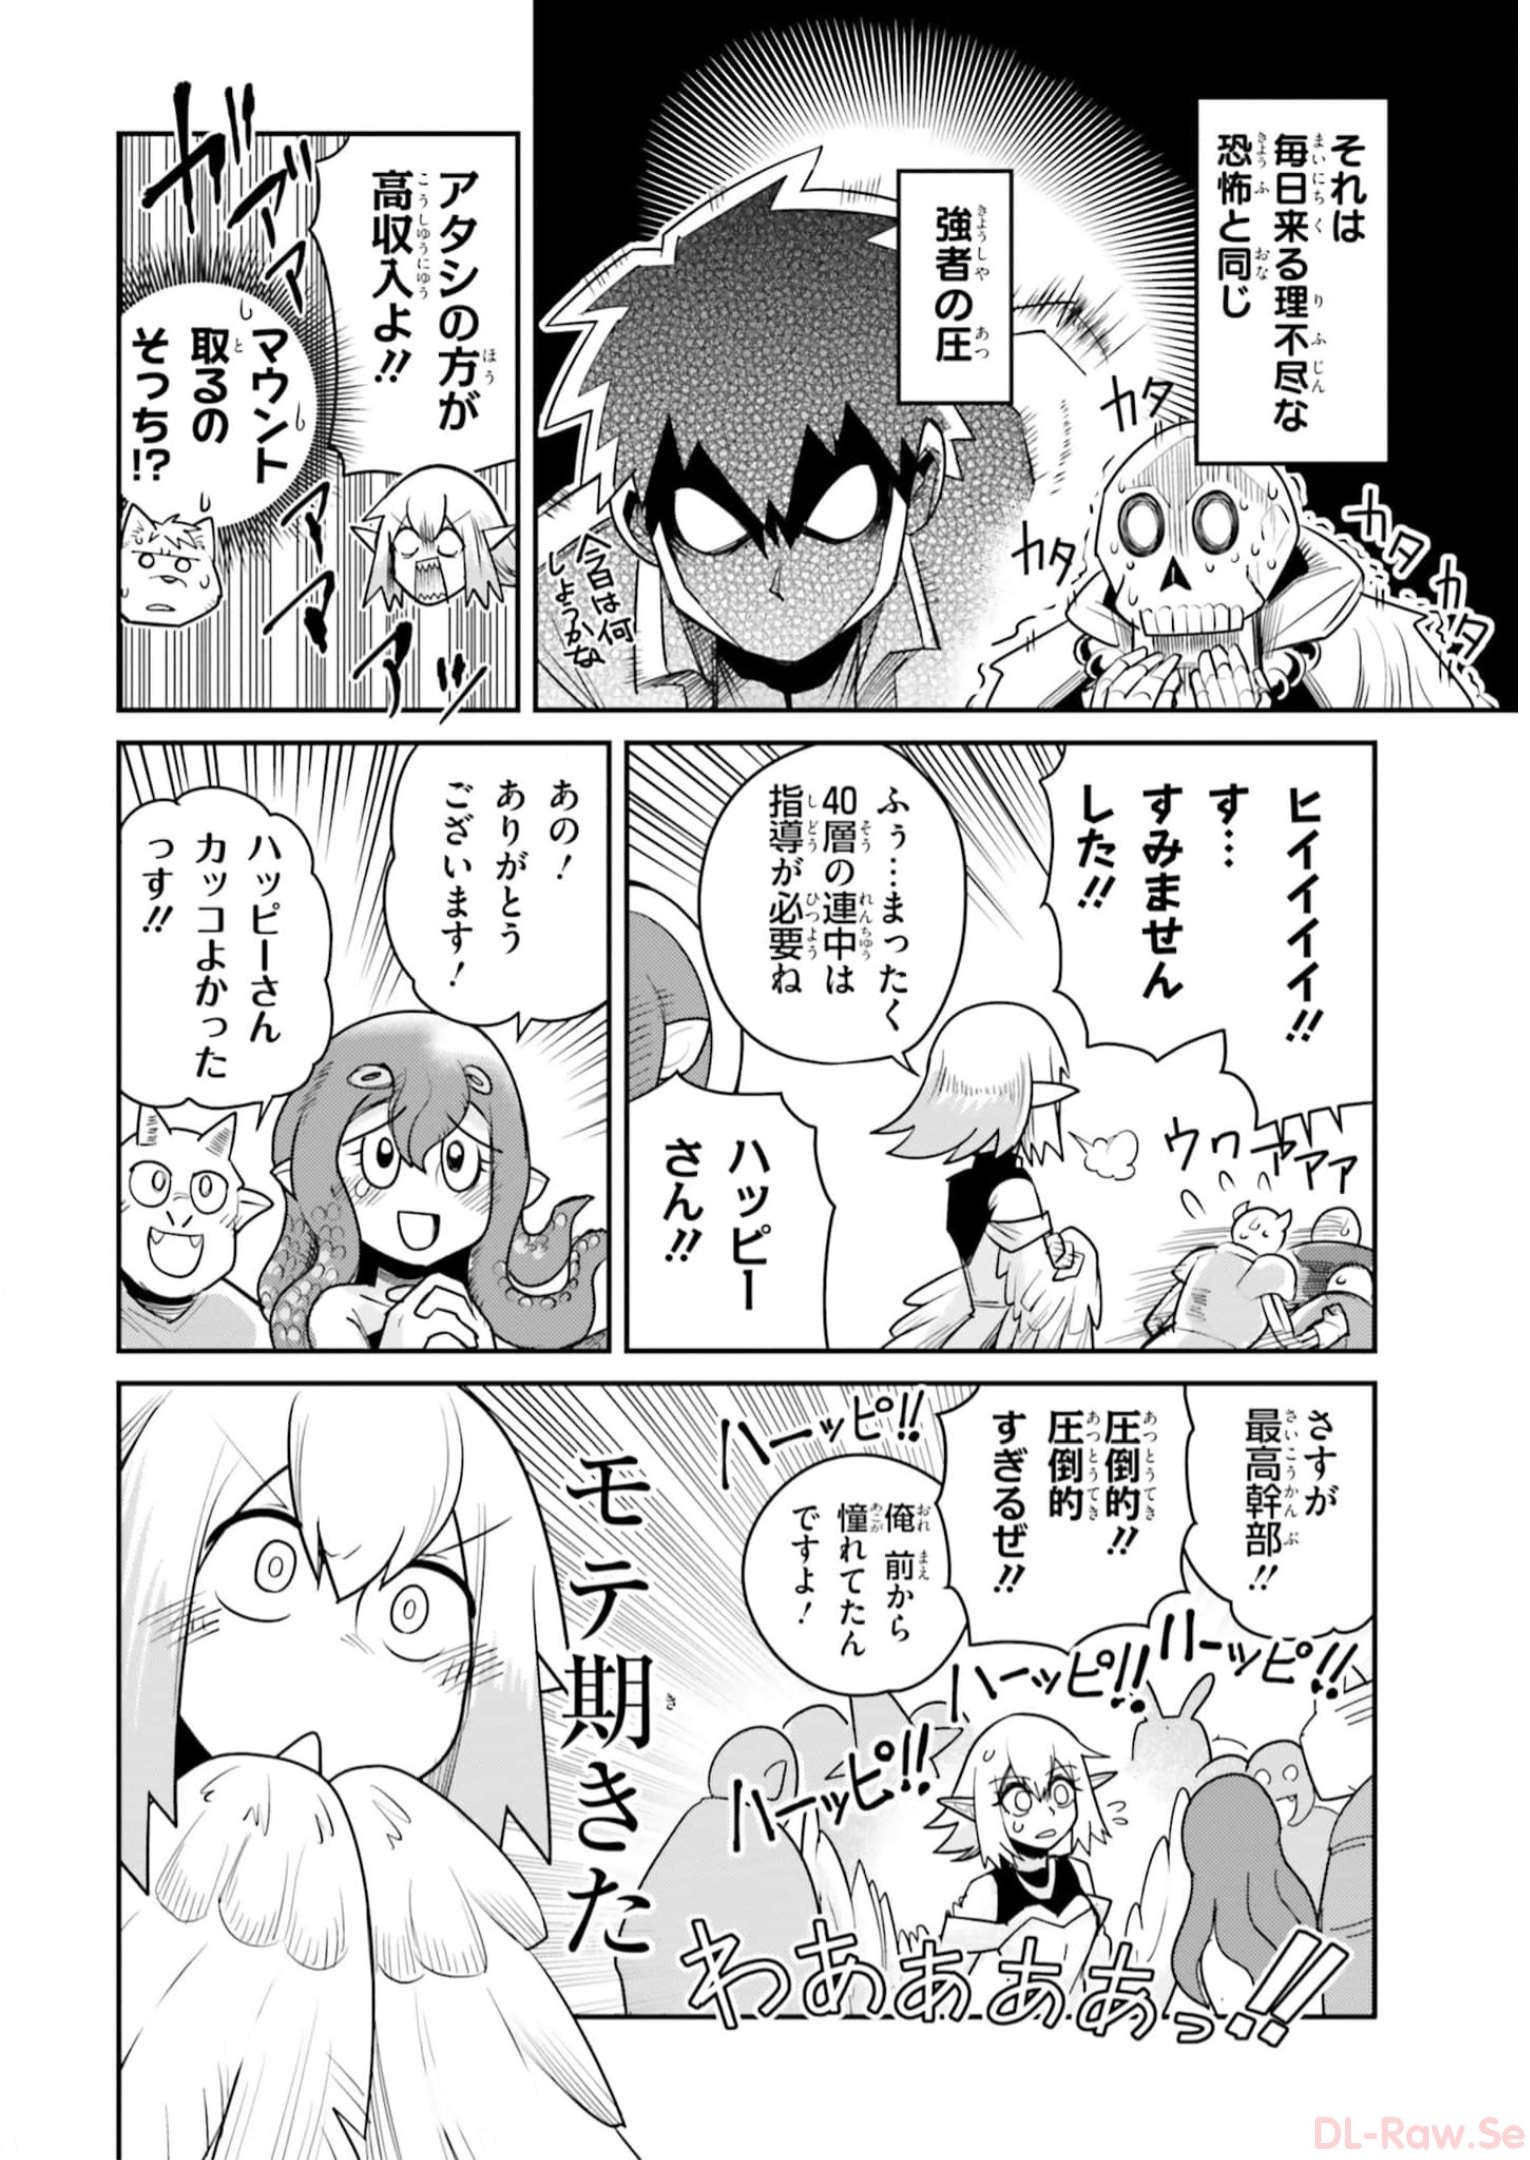 Dungeon Friends Forever Dungeon’s Childhood Friend ダンジョンの幼なじみ 第14話 - Page 12